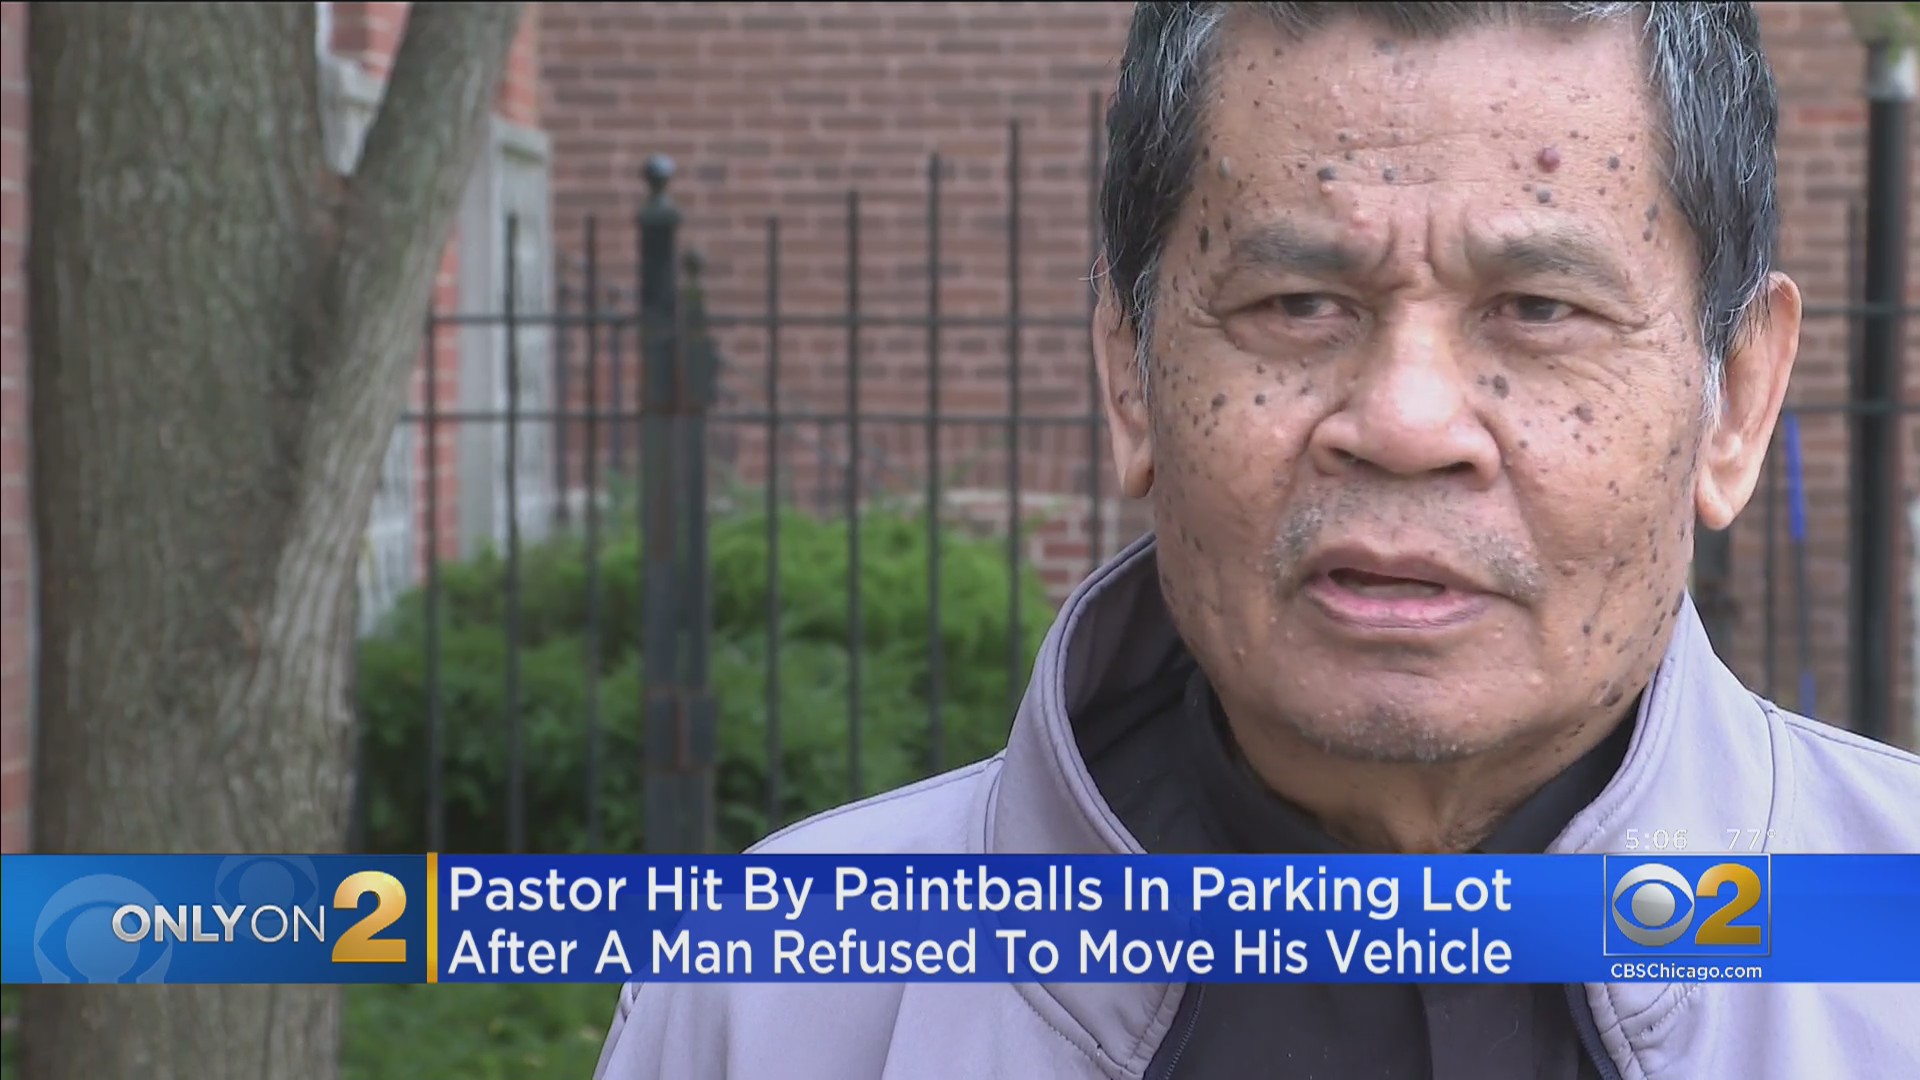 Elderly Priest Shot With Paintball Gun In Church Parking Lot: ‘Could Have Ended Worse’